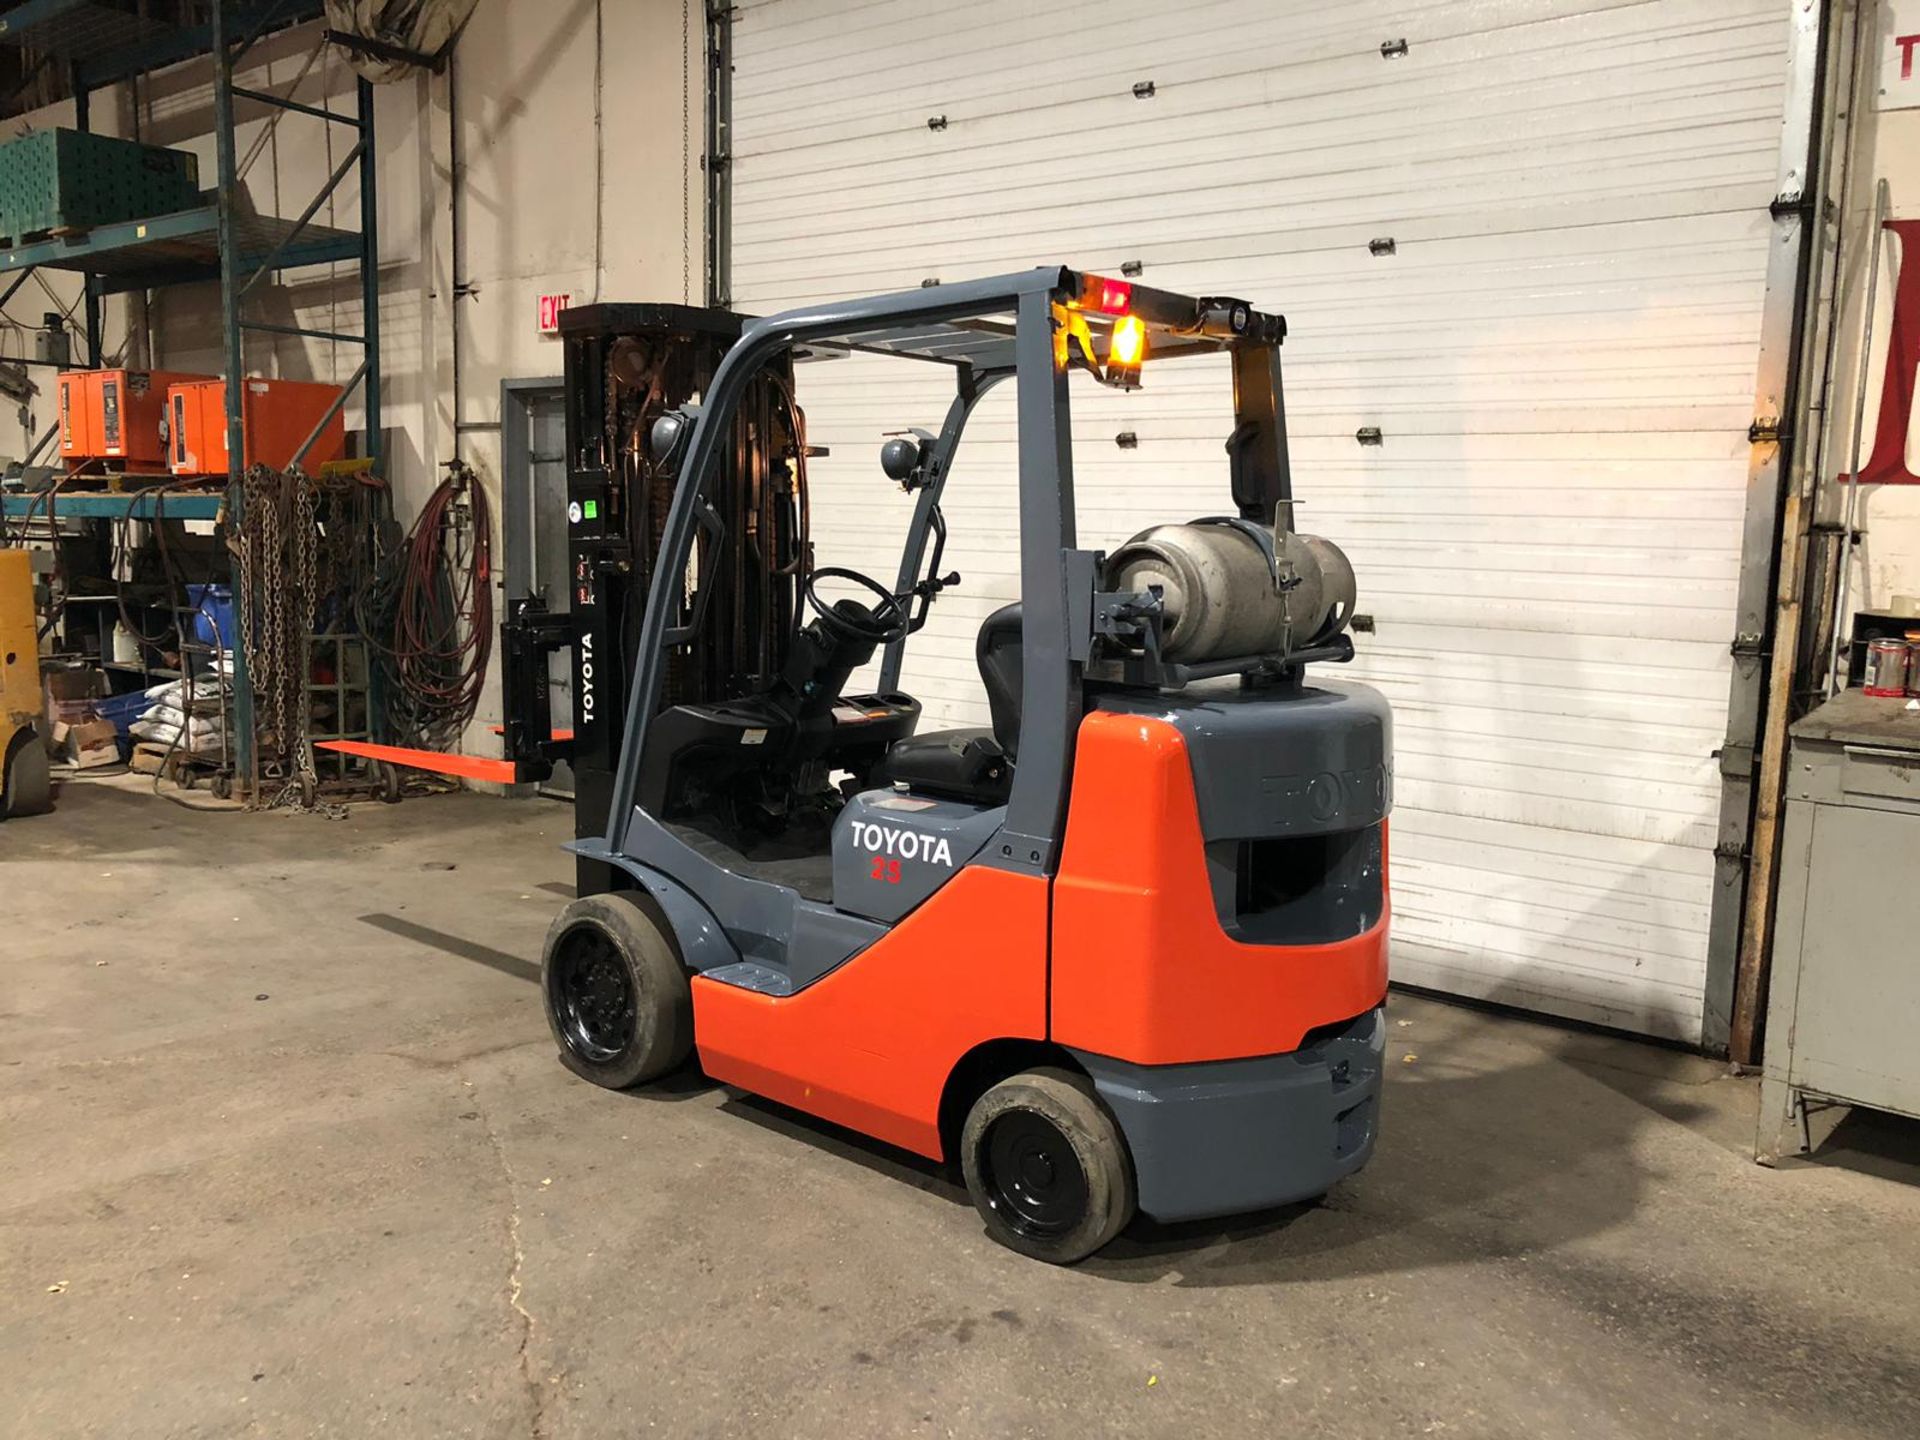 2007 Toyota 5,000lbs Capacity LPG (Propane) Forklift with sideshift and 4-STAGE MAST (no propane - Image 2 of 5